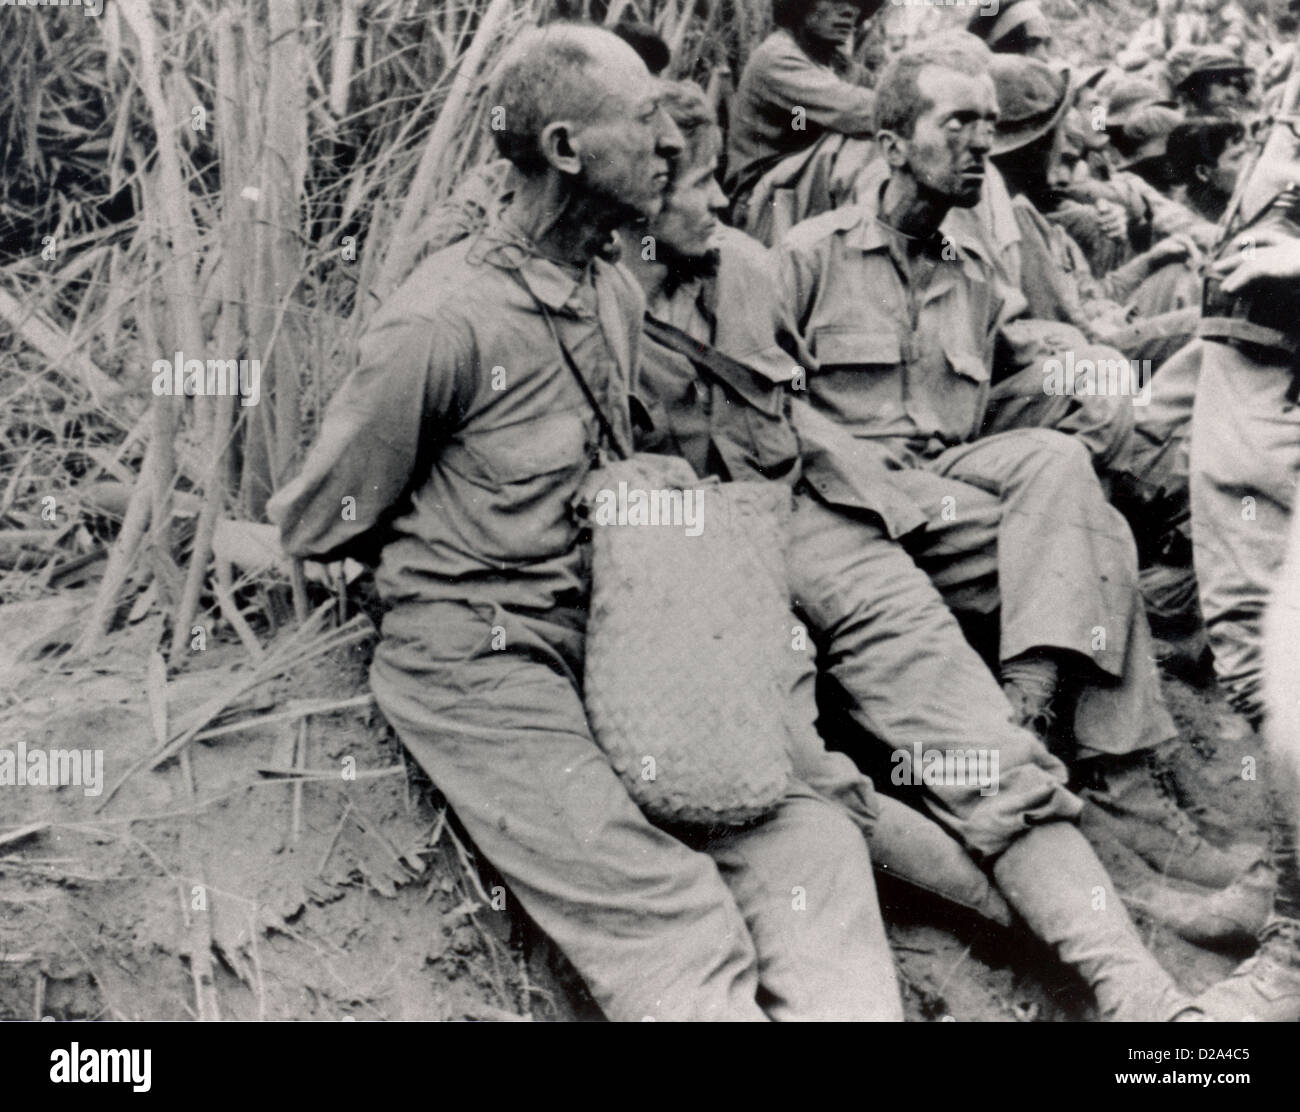 Bataan About May 1942 March Death Bataan Cabanatuan Prison Camp Along March These Prisoners Were Photographed They Have Their Stock Photo